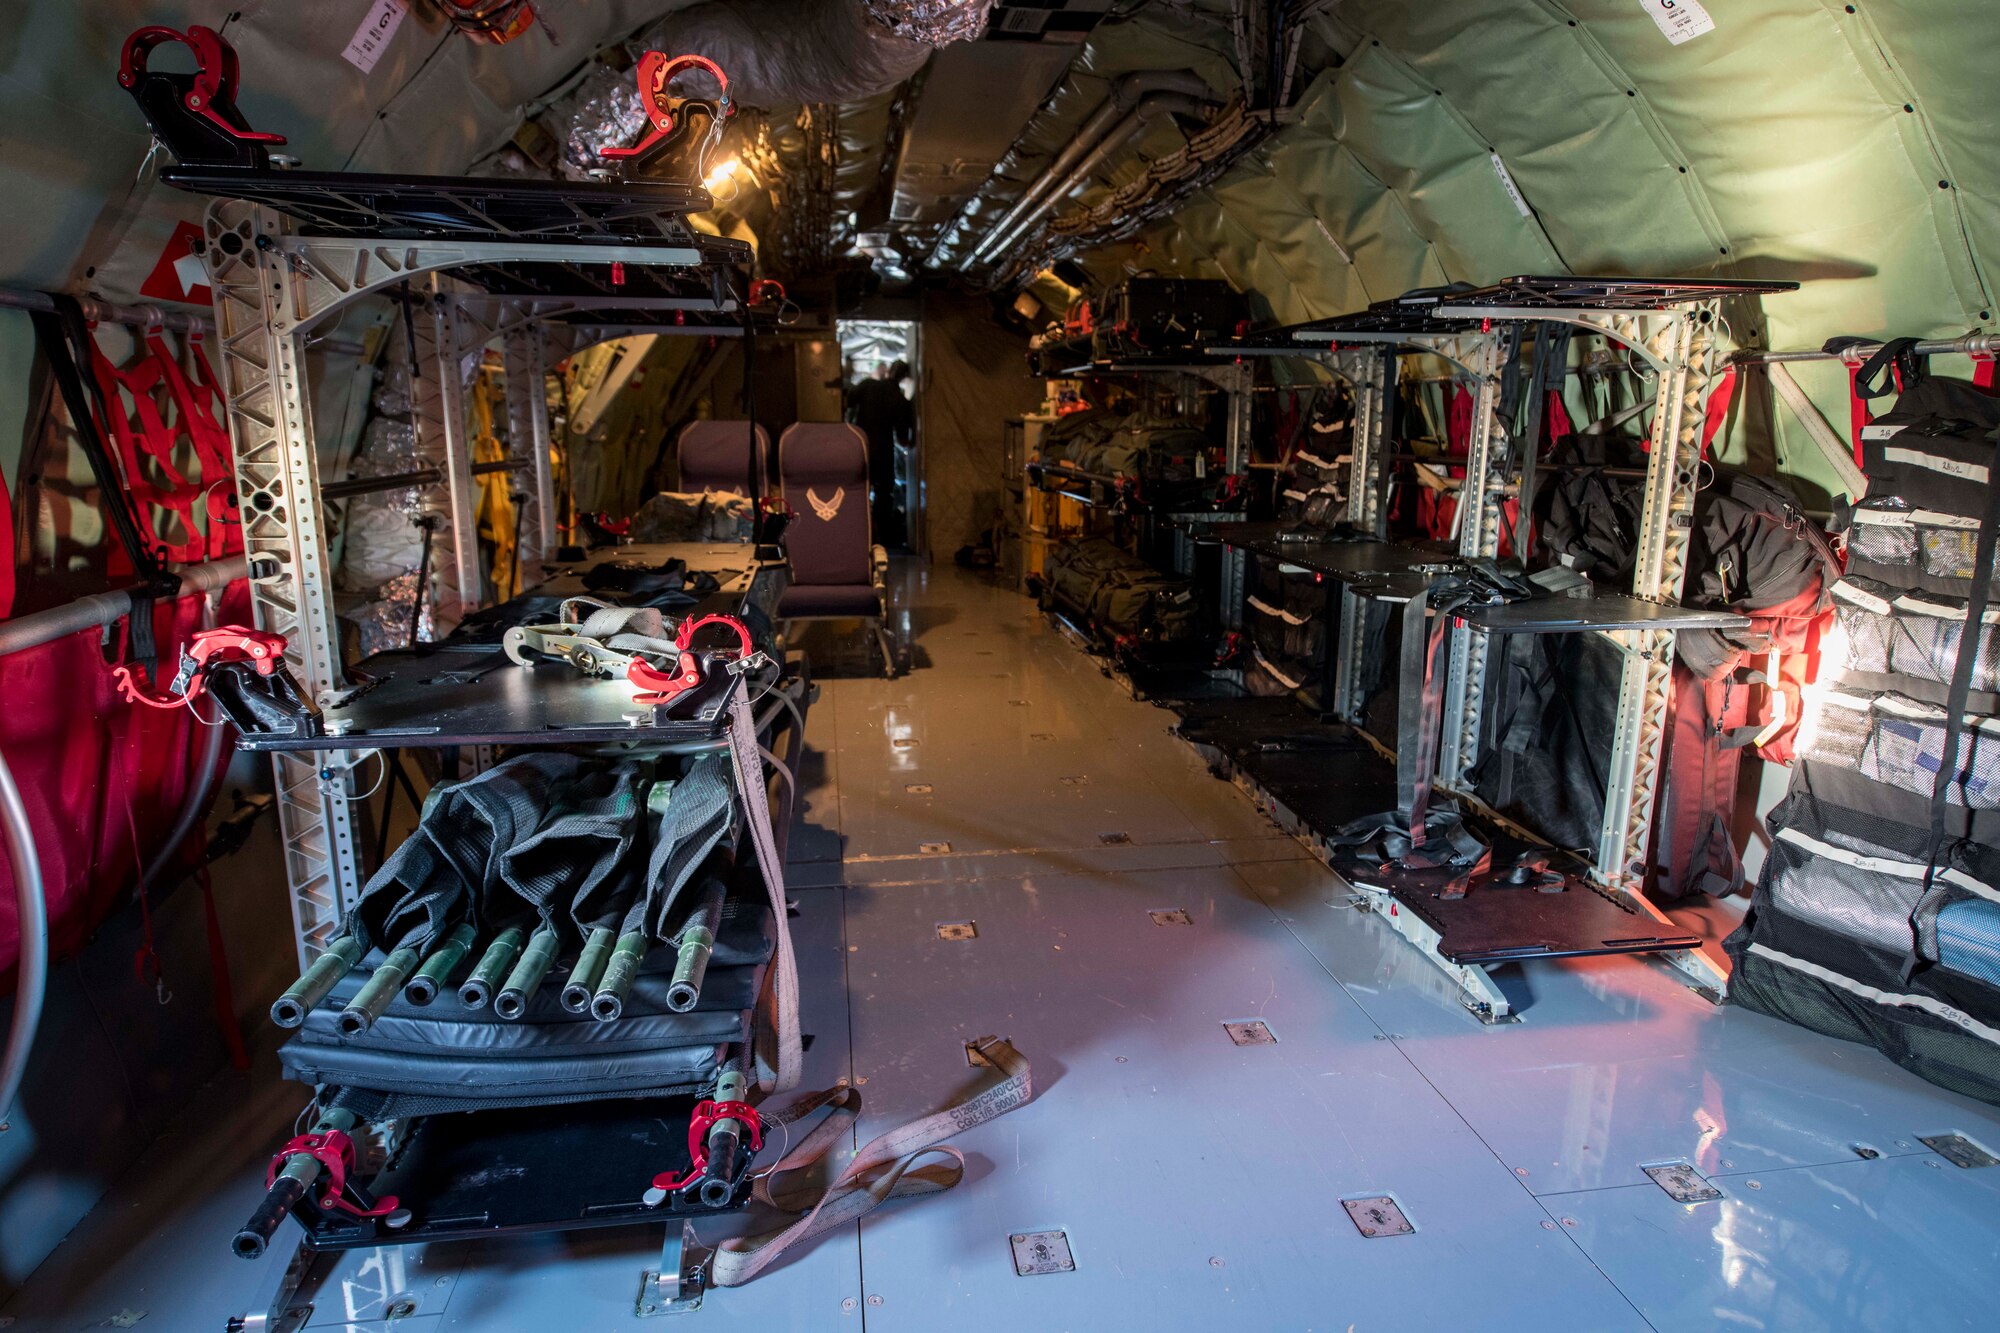 An aeromedical evacuation configuration is completed on a KC-135 Stratotanker in preparation for an AE mission at Travis Air Force Base, California, Nov. 7, 2020. Even though the primary mission of the KC-135 is extending Global Reach through air refueling, Stratotankers are capable of supporting a variety of missions including cargo delivery, AE, passenger delivery, serving as a communication platform and more. (U.S. Air Force photo by Senior Airman Lawrence Sena)